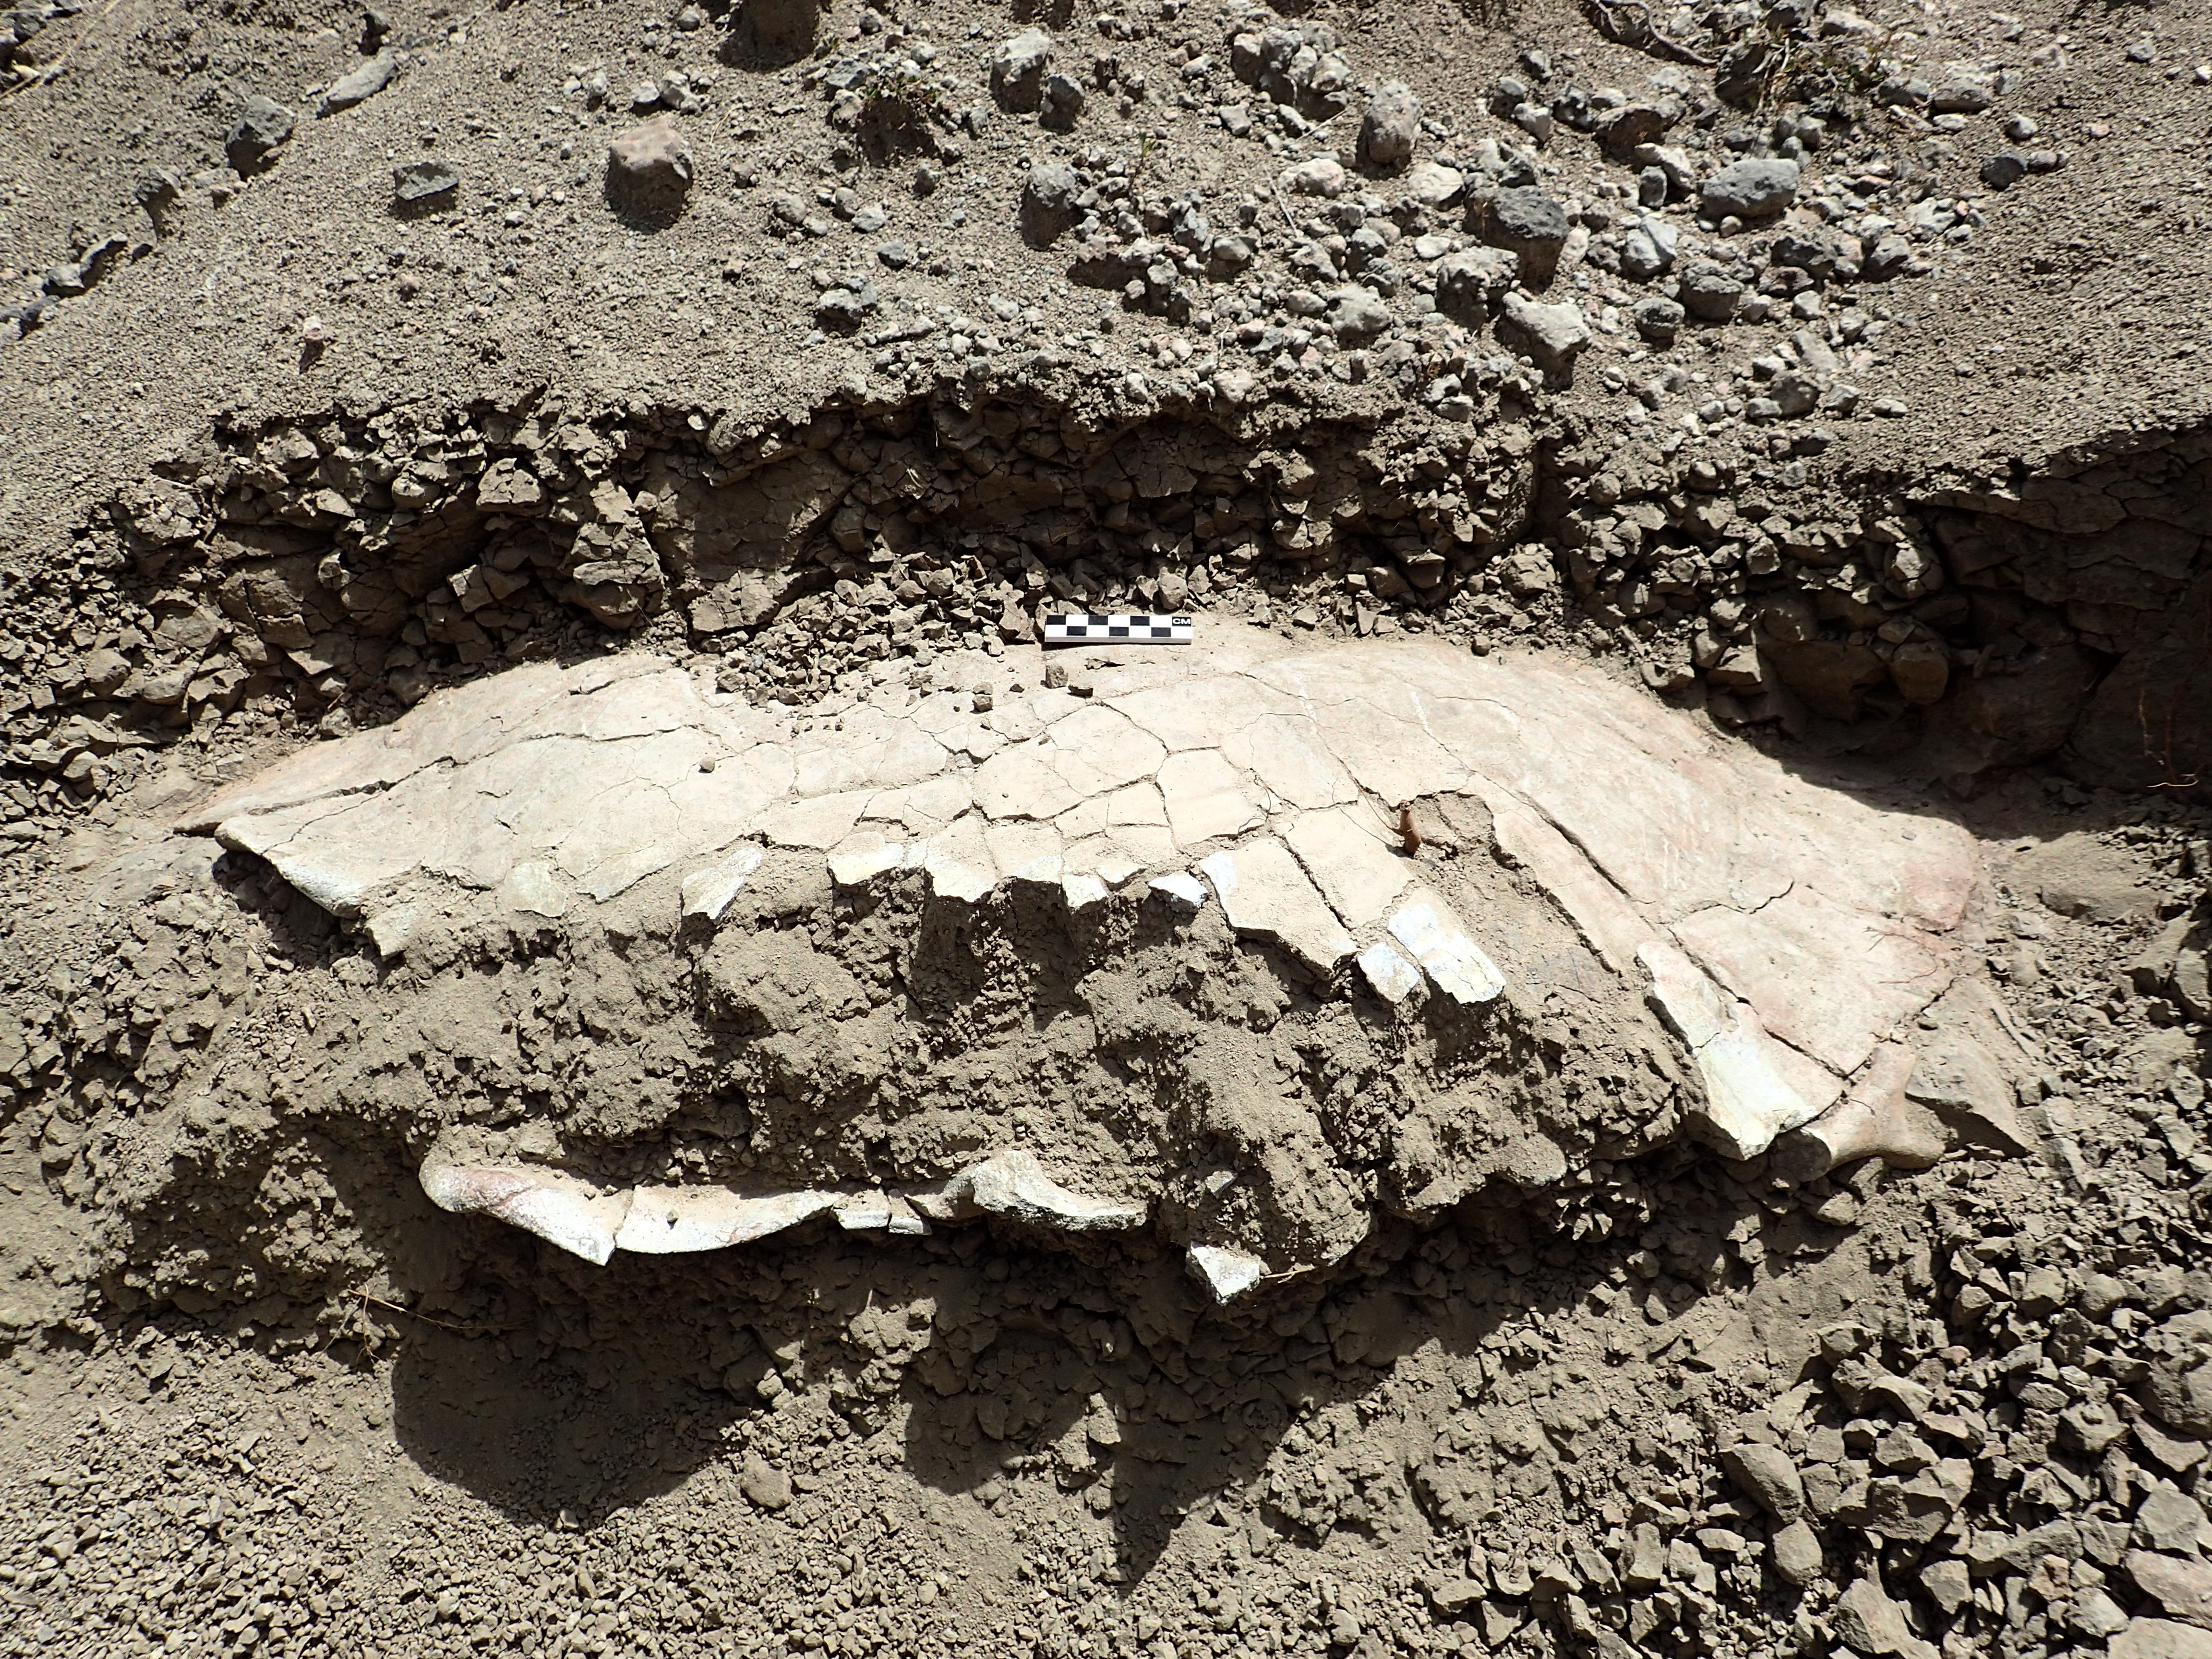 Partially exposed turtle fossil, Colombia's Tatacoa Desert, July 2014 (photo by Siobhán Cooke)